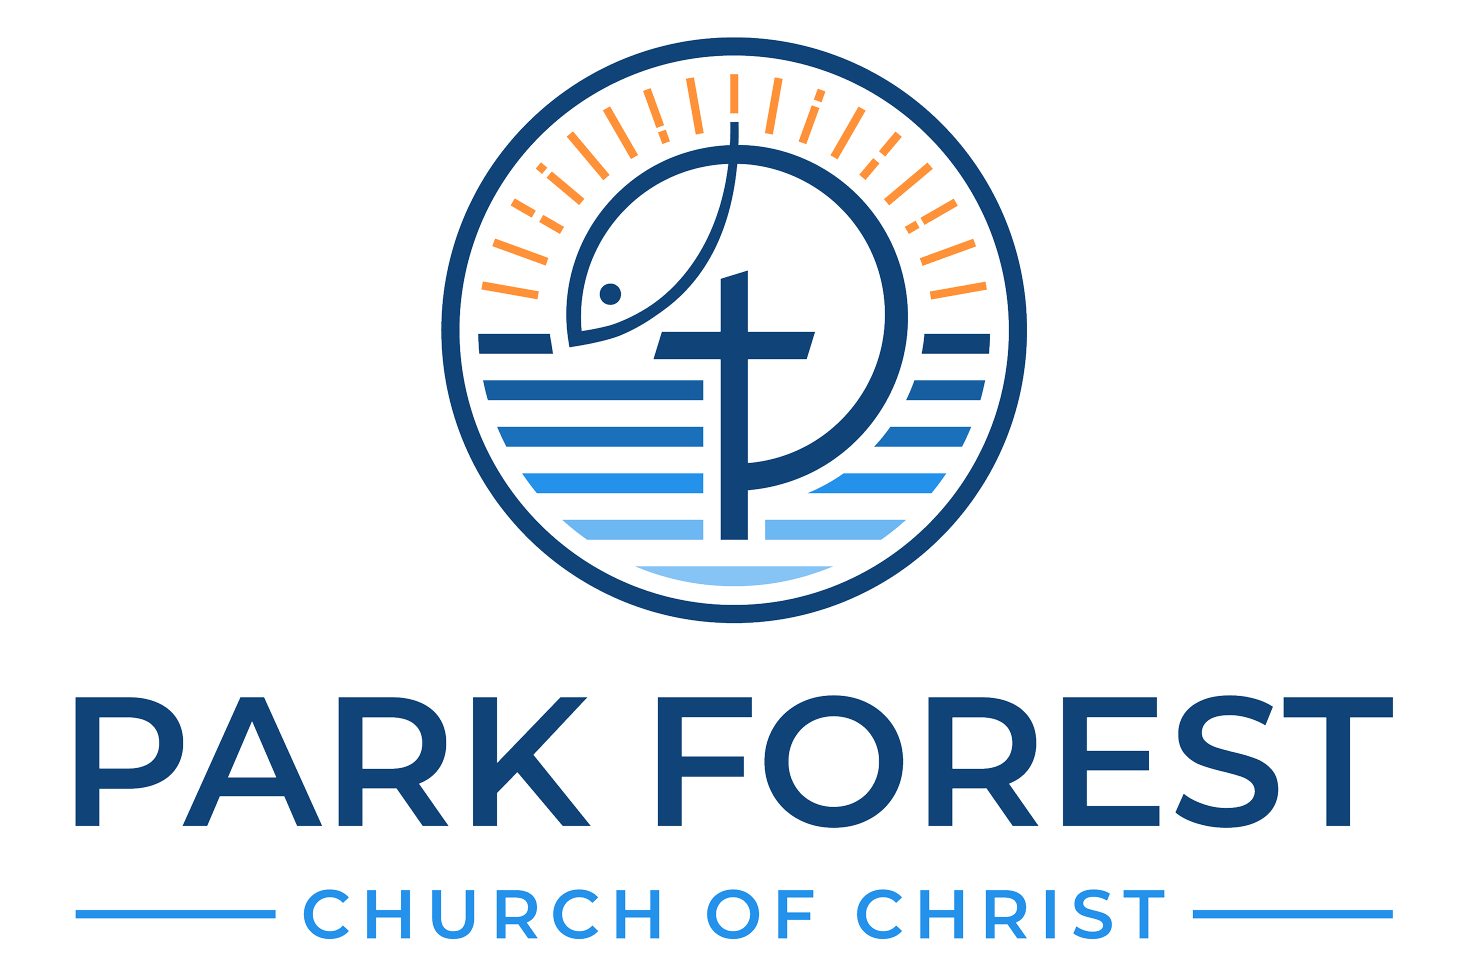 Park Forest Church of Christ